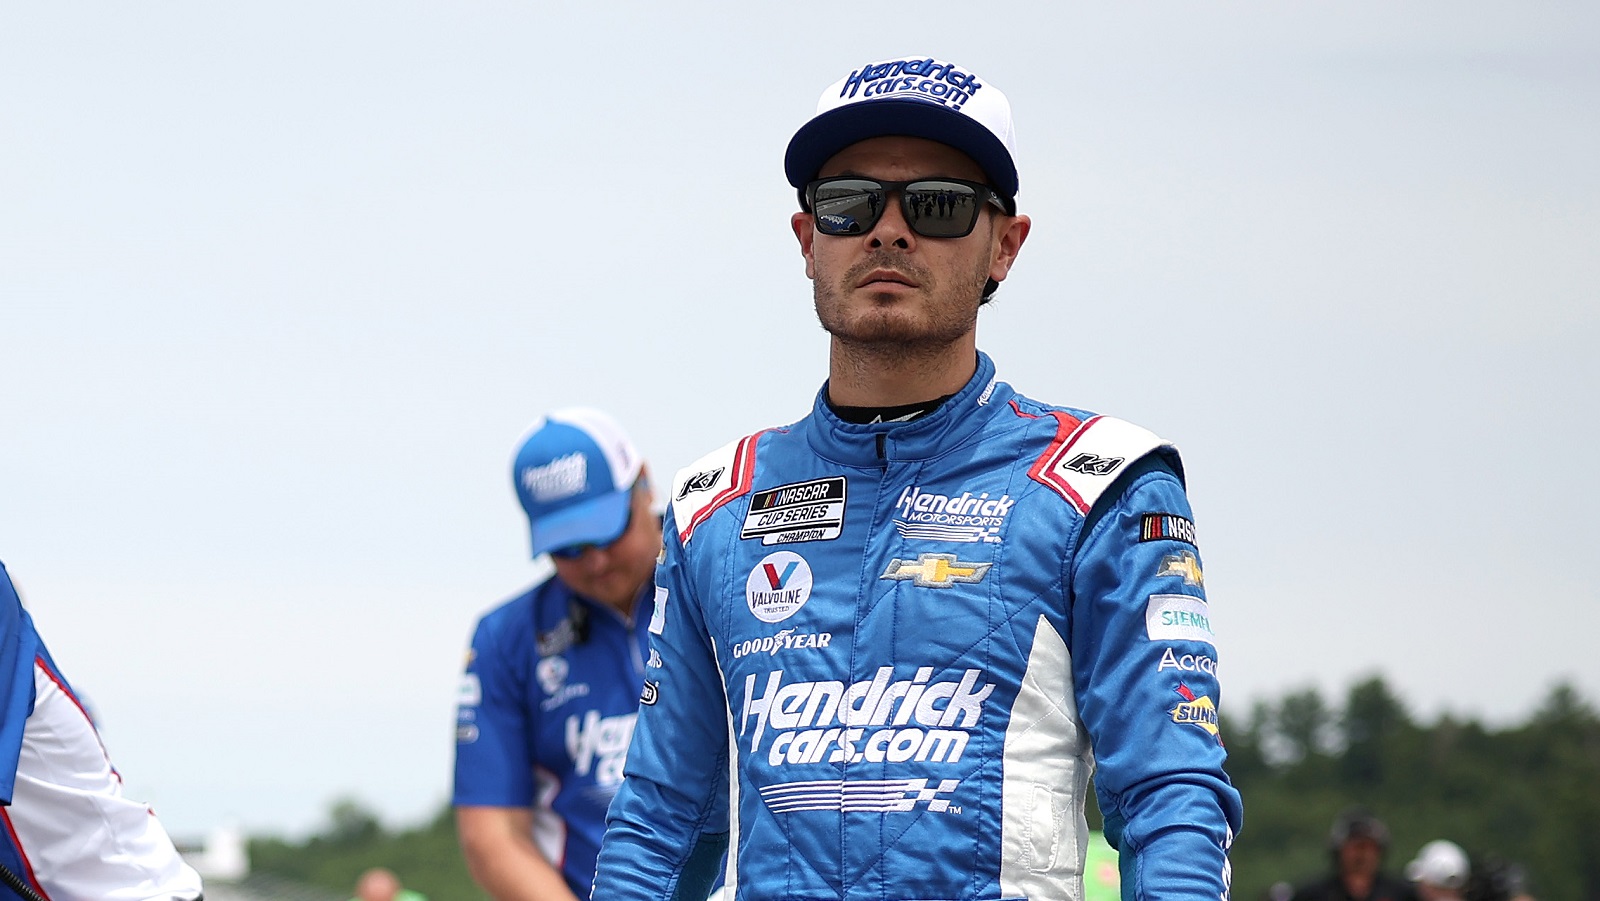 Kyle Larson walks the grid during qualifying for the NASCAR Cup Series Ambetter 301 at New Hampshire Motor Speedway on July 16, 2022.